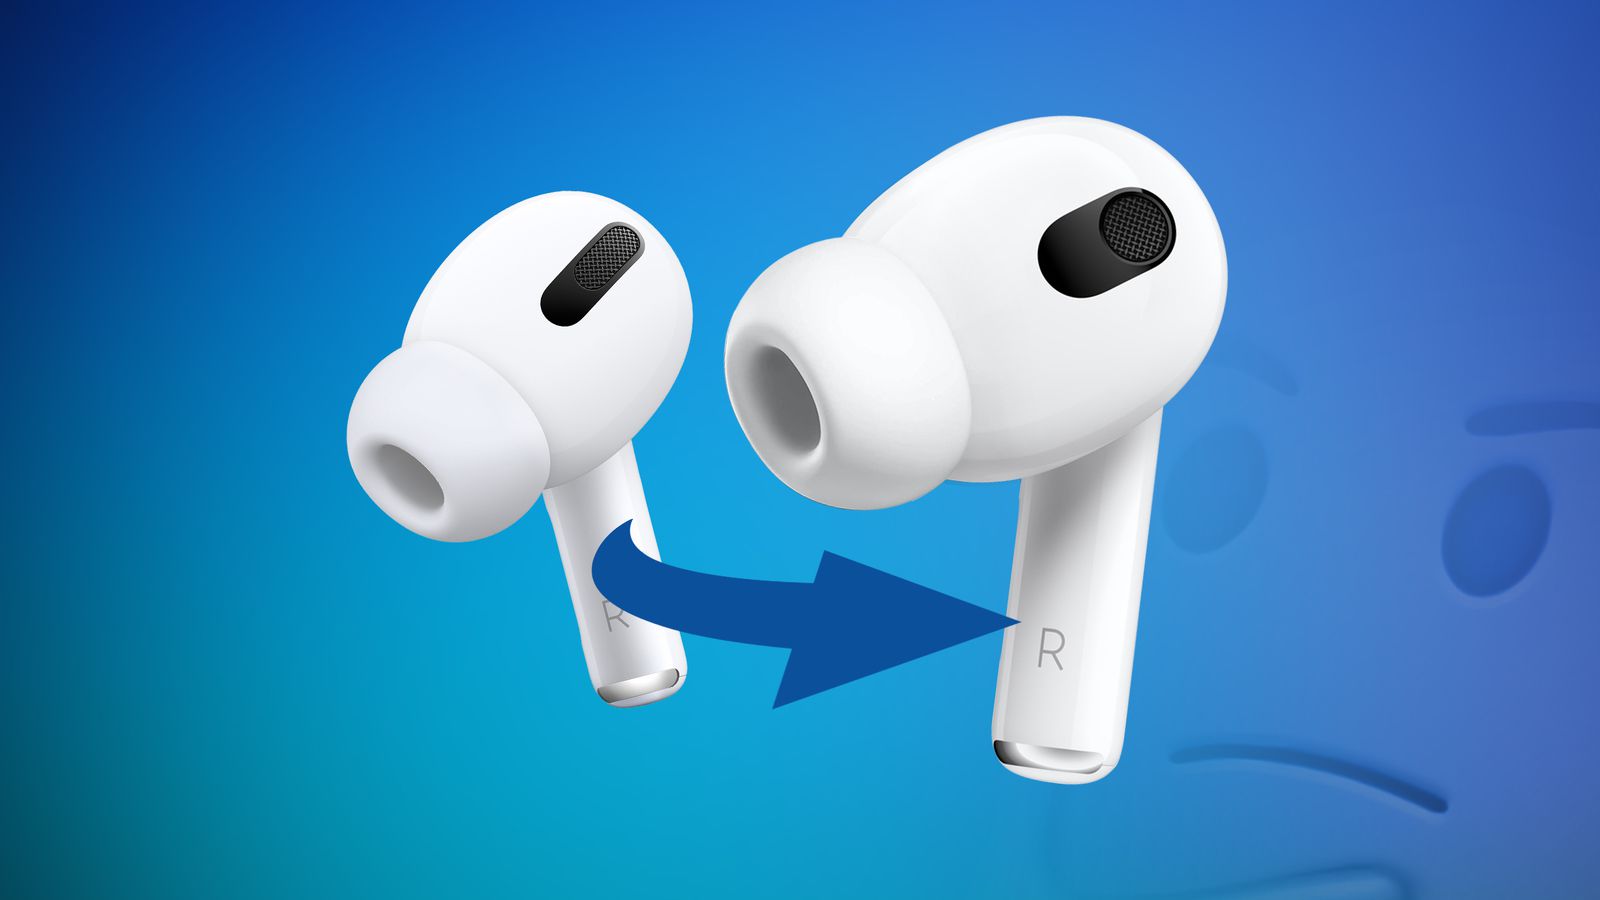 Alleged photo of AirPods 3 parts shows AirPods Pro-inspired design